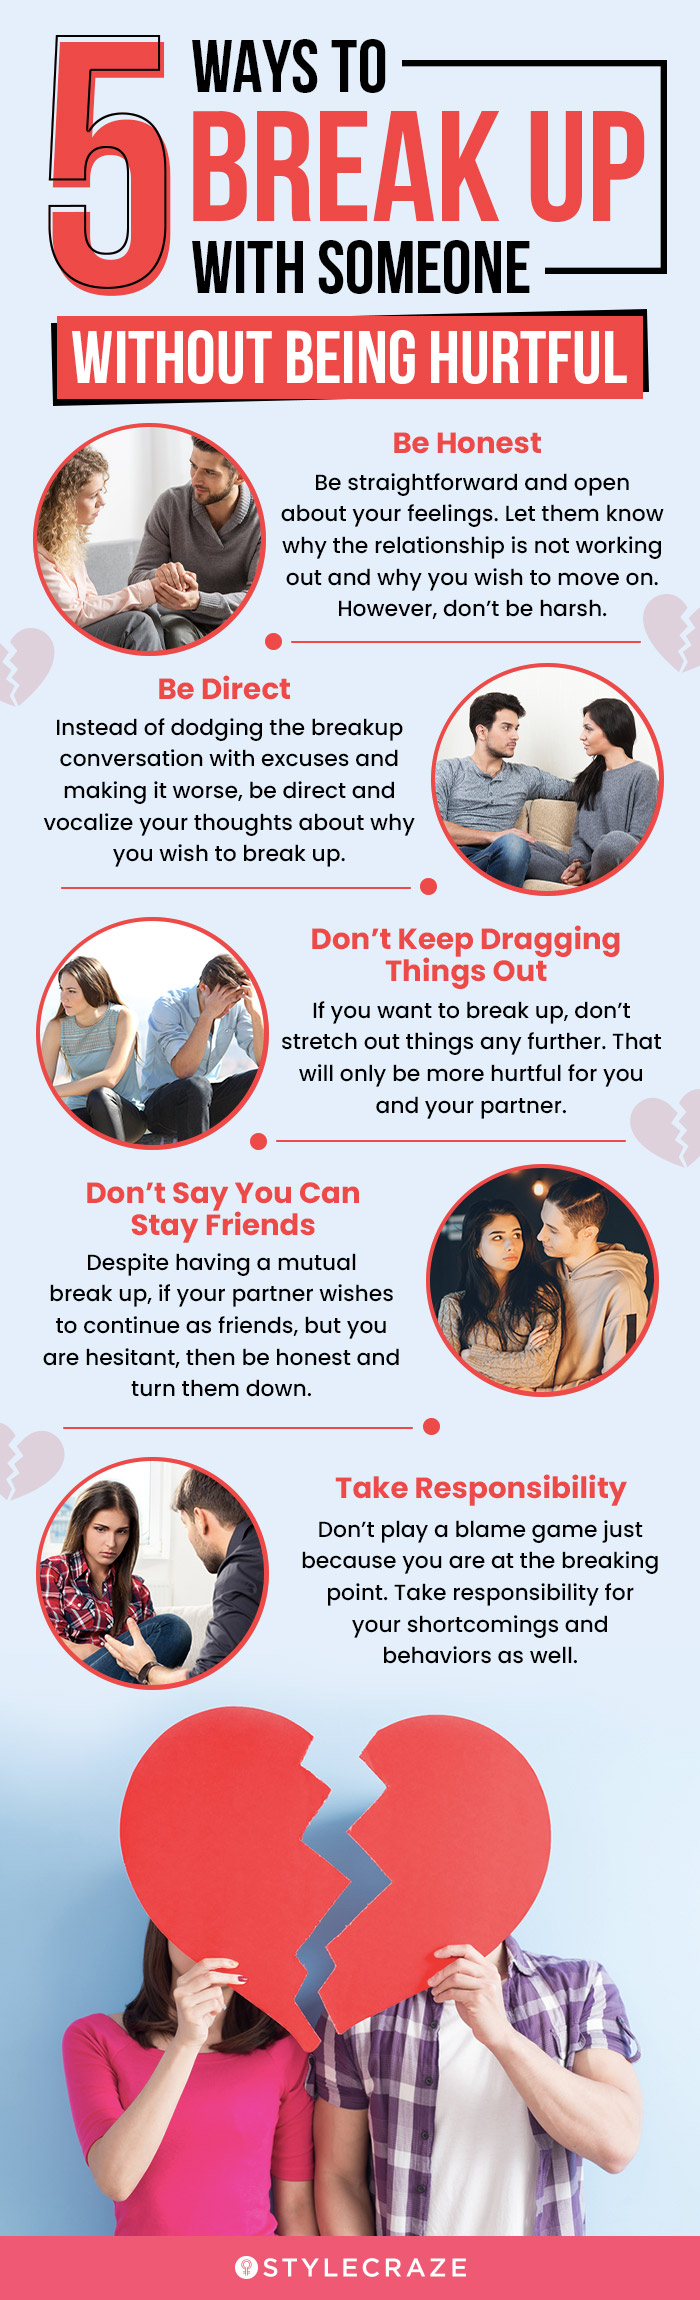 5 ways to break up with someone without being hurtful (infographic)